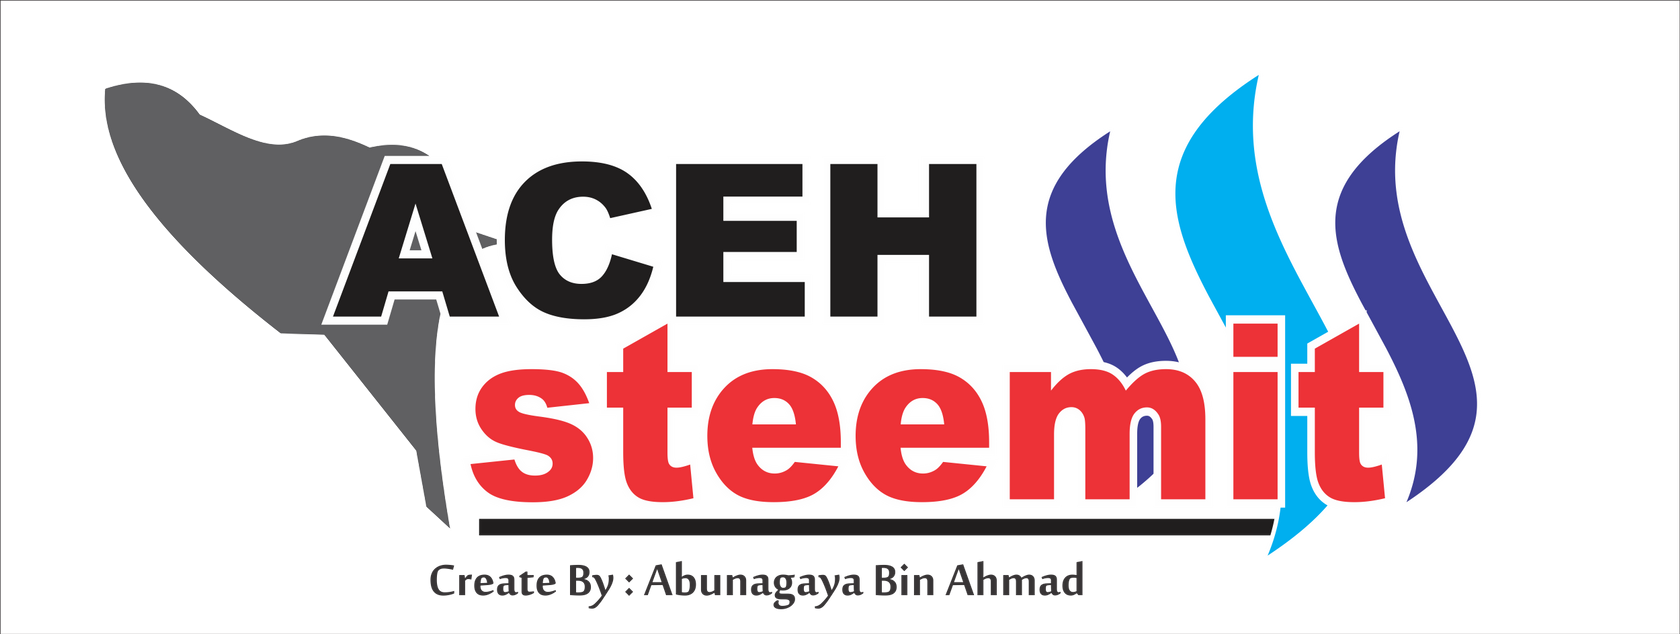 Logo Steemit Aceh.png